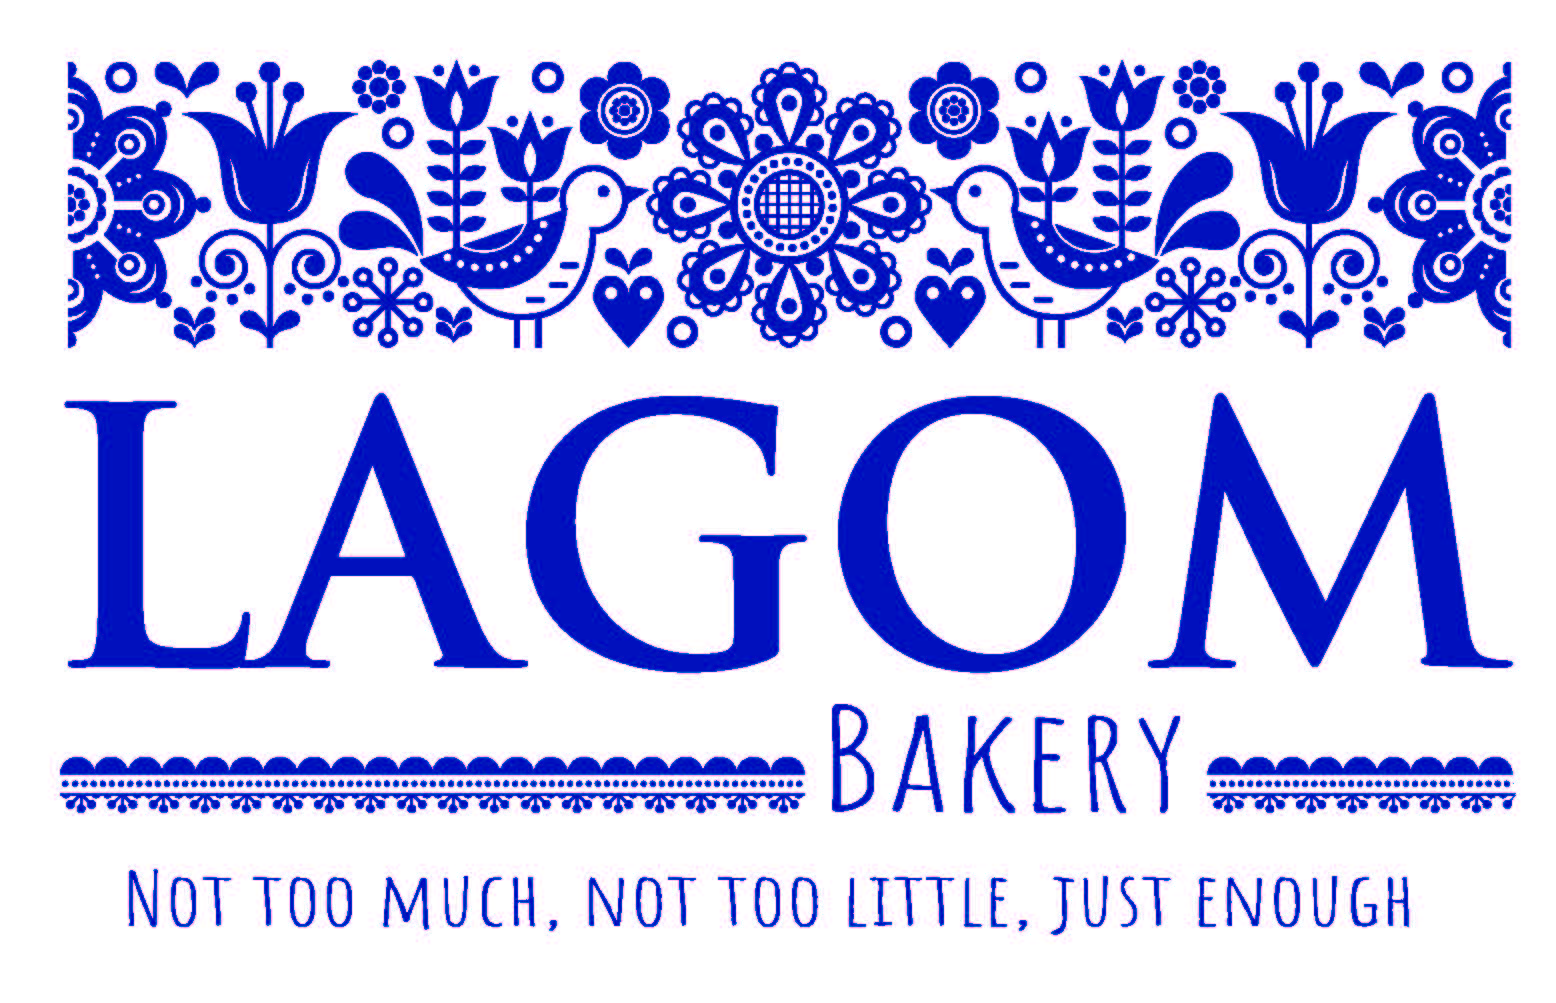 Lagom Bakery: Not too much, not too little, just enough